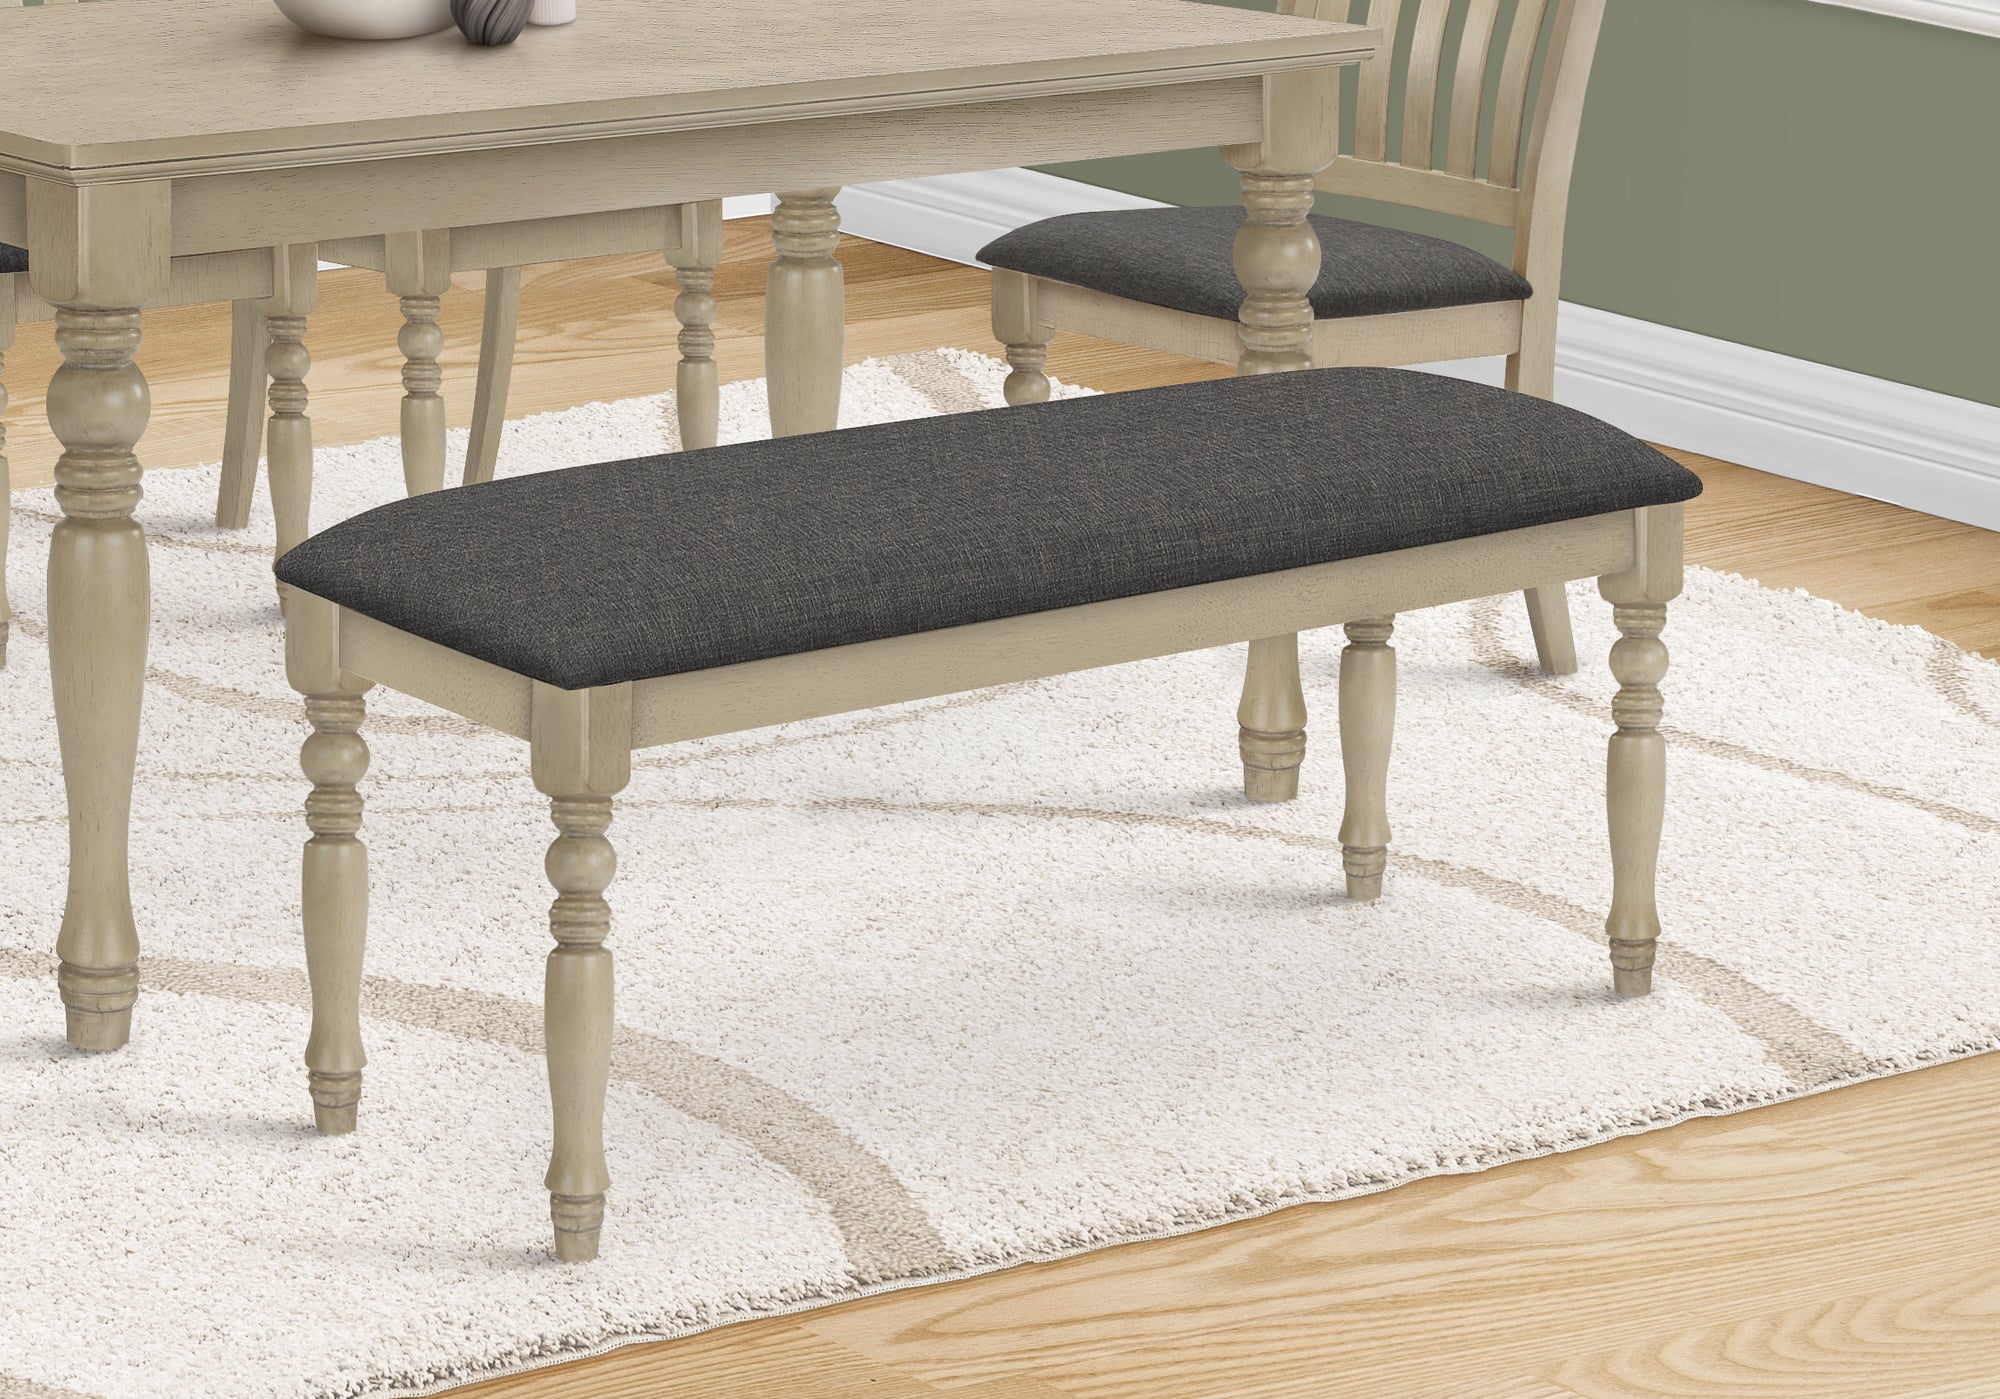 MN-421393    Bench, 48" Rectangular, Upholstered, Wood, Entryway, Dining Room, Kitchen, Antique Grey, Grey Fabric, Grey Solid Wood, Transitional